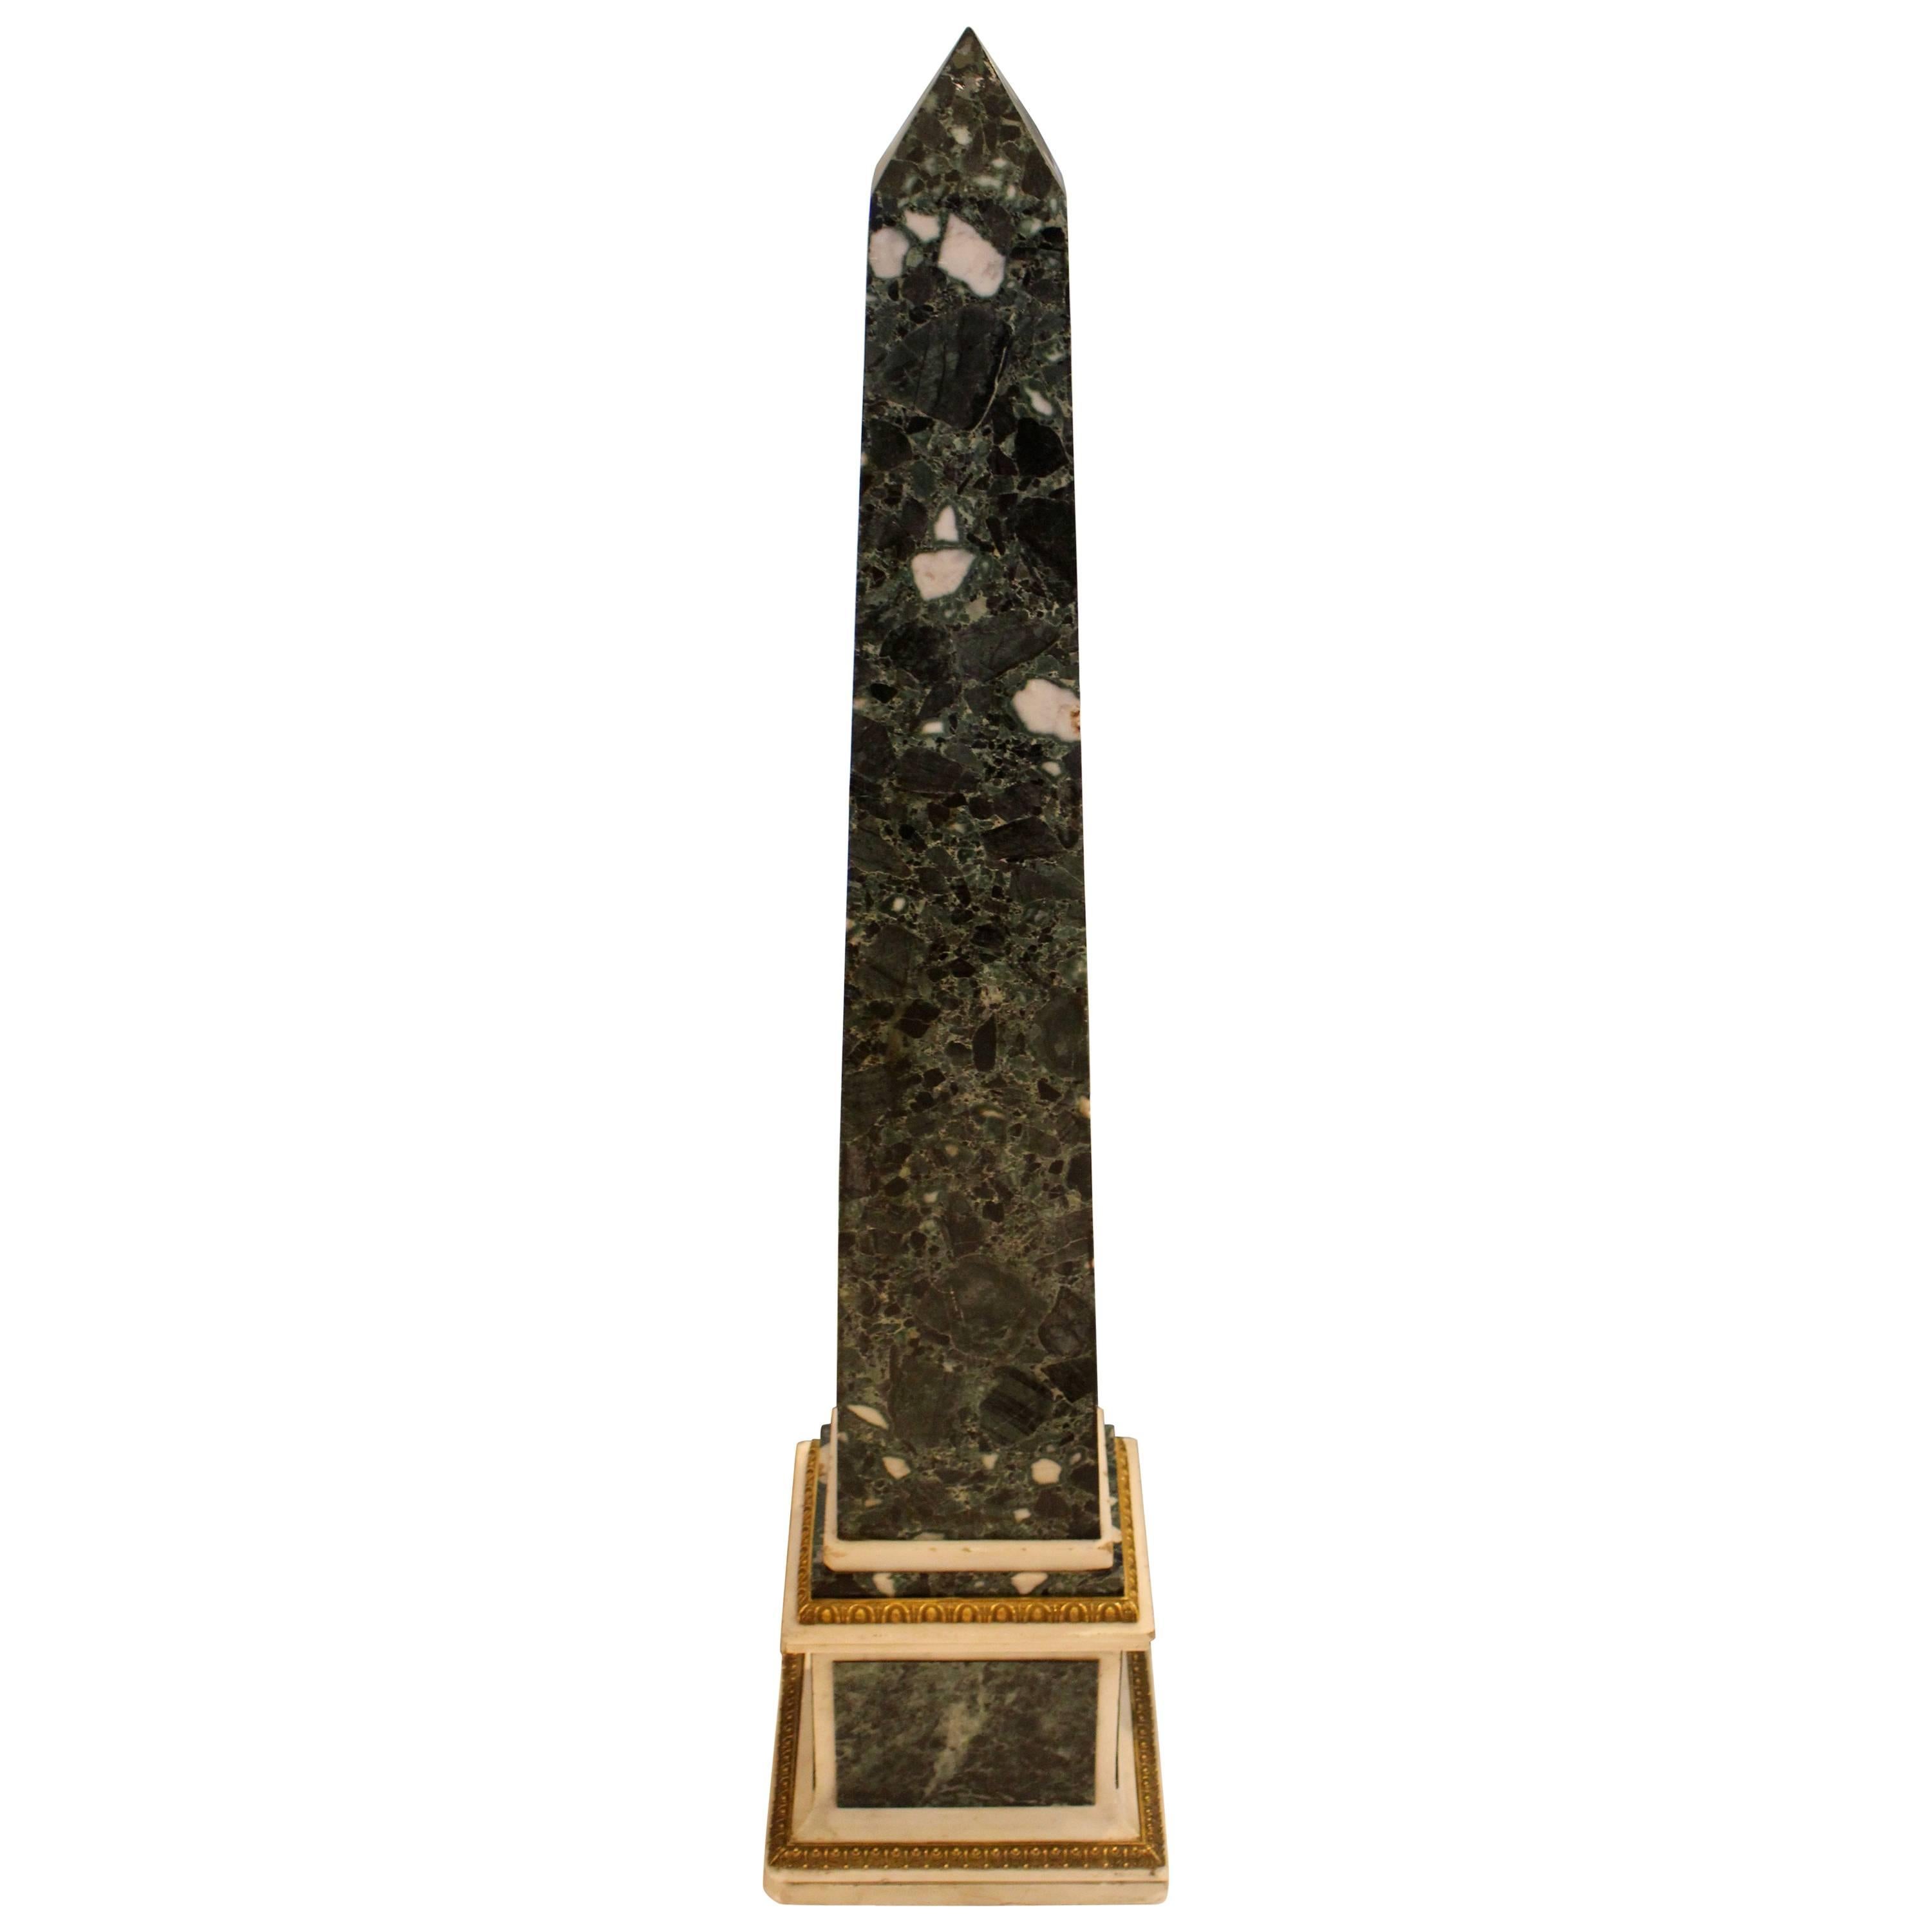 Italian Neoclassical Gilt Bronze-Mounted Verde Antico and White Marble Obelisk For Sale